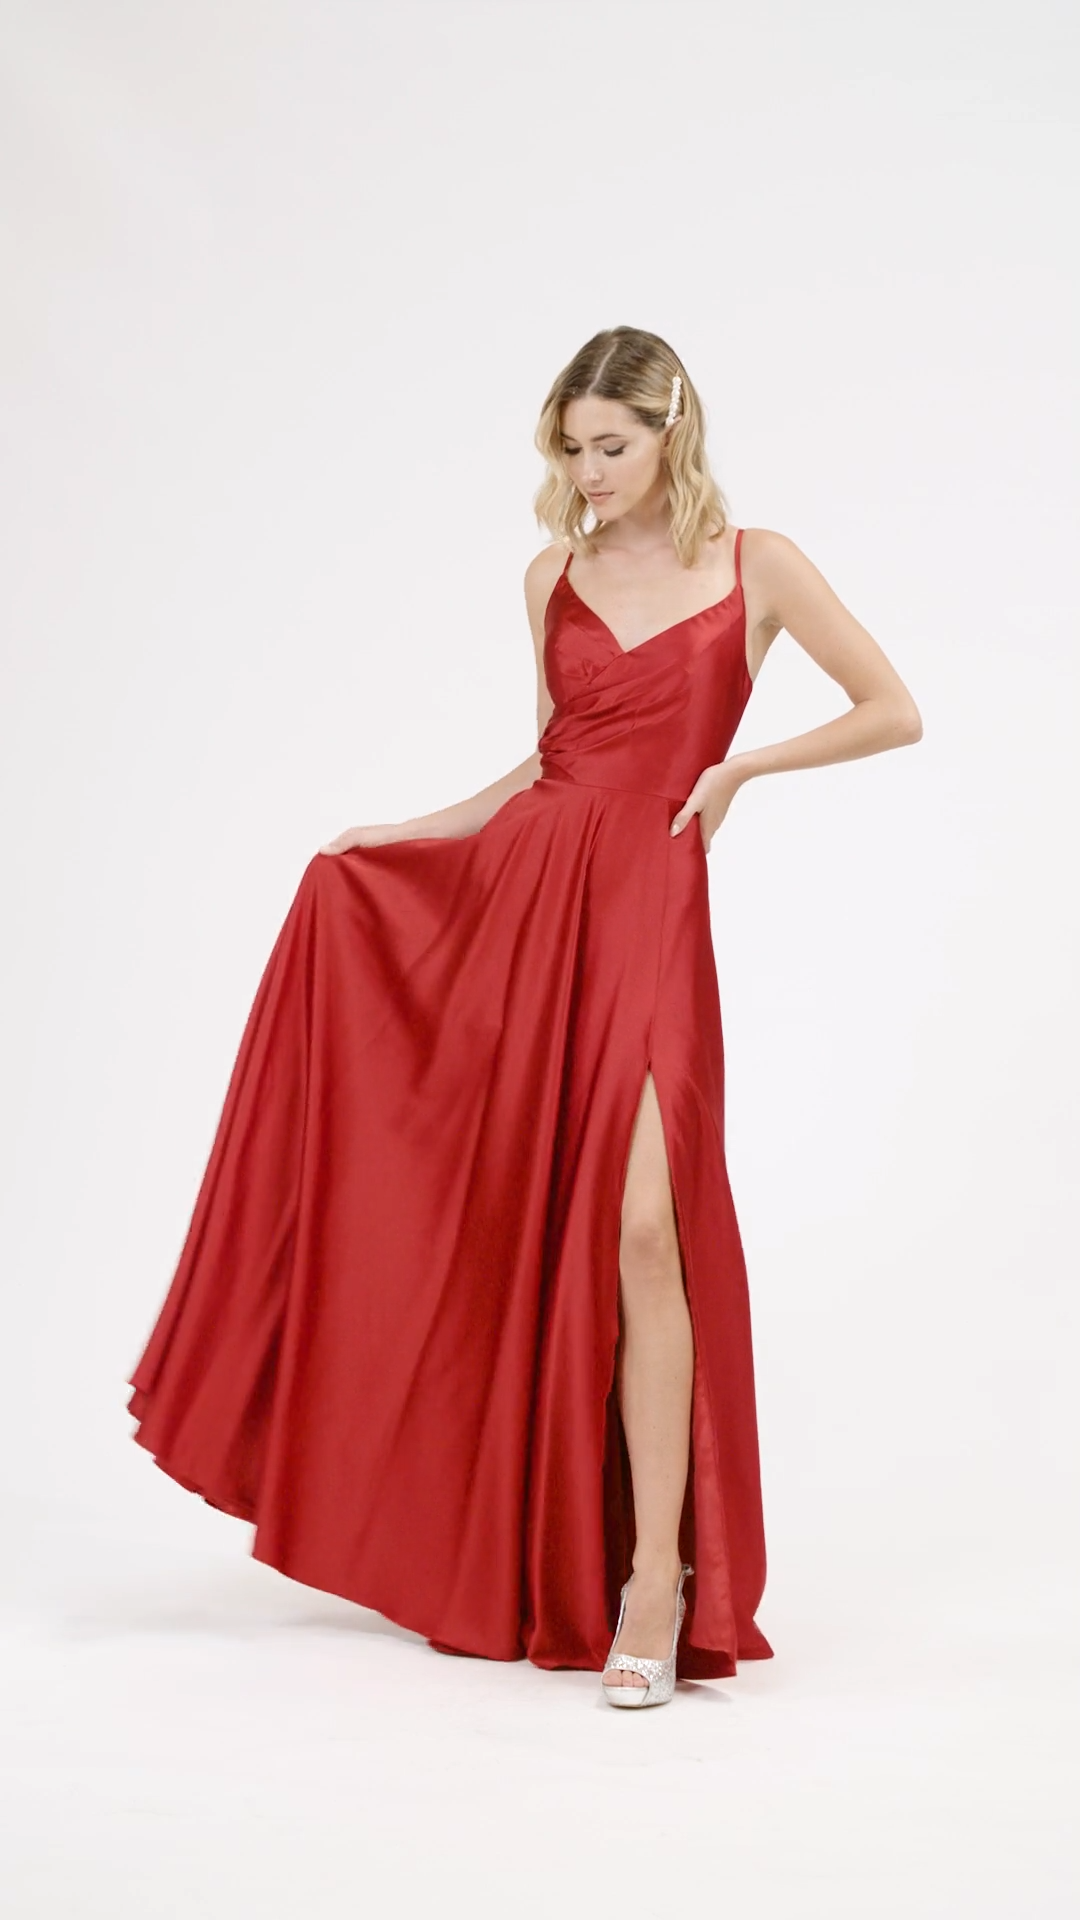 Val Stefani 3917RA light weight smooth satin A-line gown with surplice sweetheart neckline and lace-up back